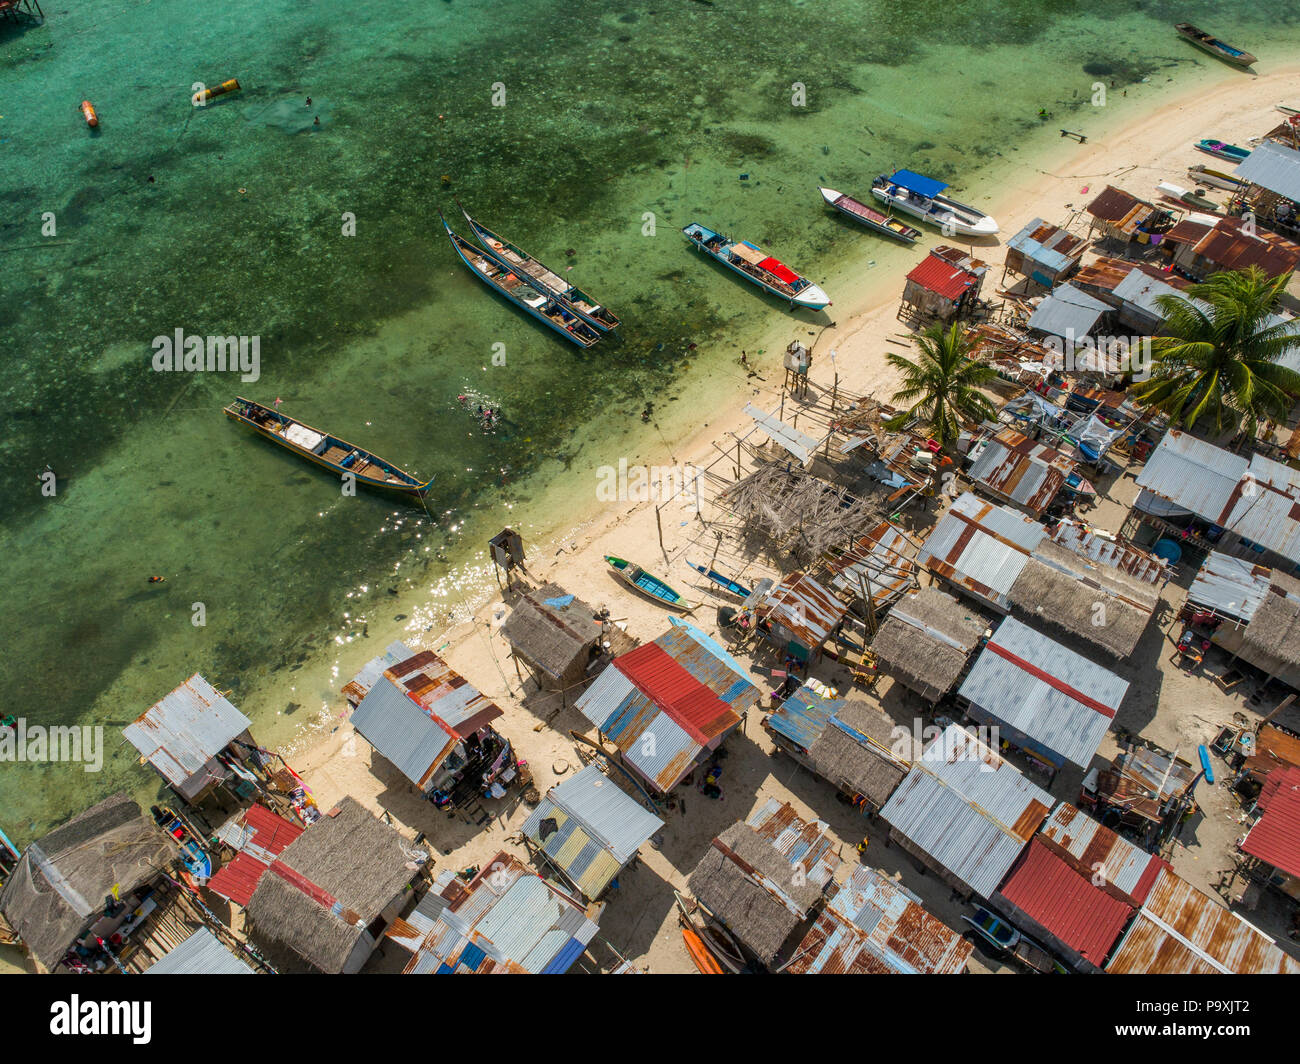 A drone photo looking down on a very poor Bajau sea gypsy village, and beach, boats, and shallow tropical water, at Mabul Island, Sabah, Malaysia. Stock Photo